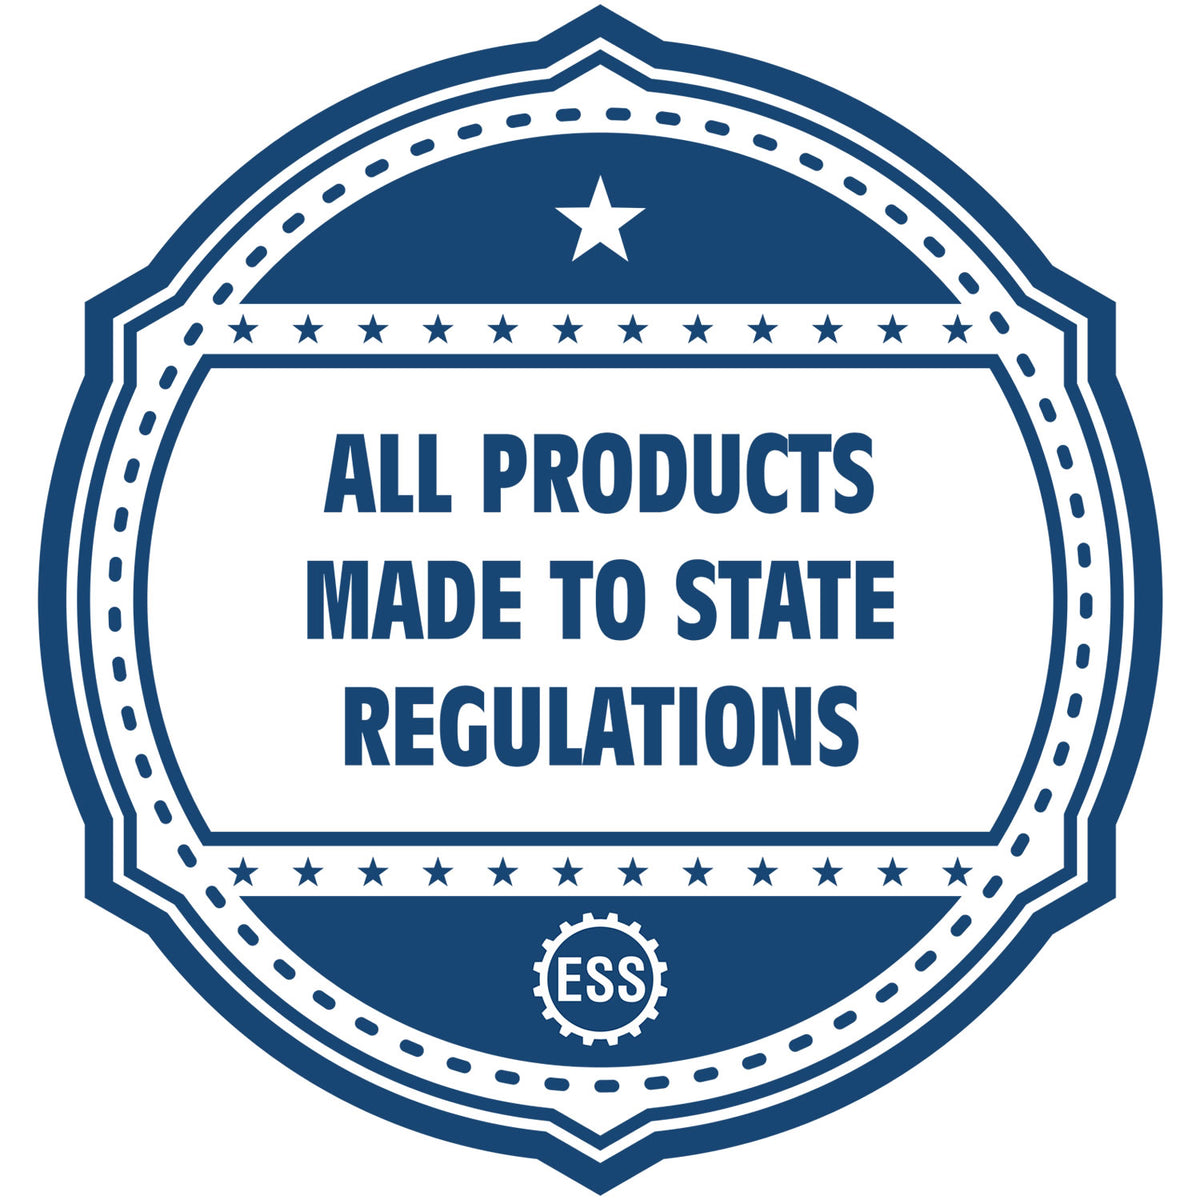 An icon or badge element for the Digital Alaska Landscape Architect Stamp showing that this product is made in compliance with state regulations.